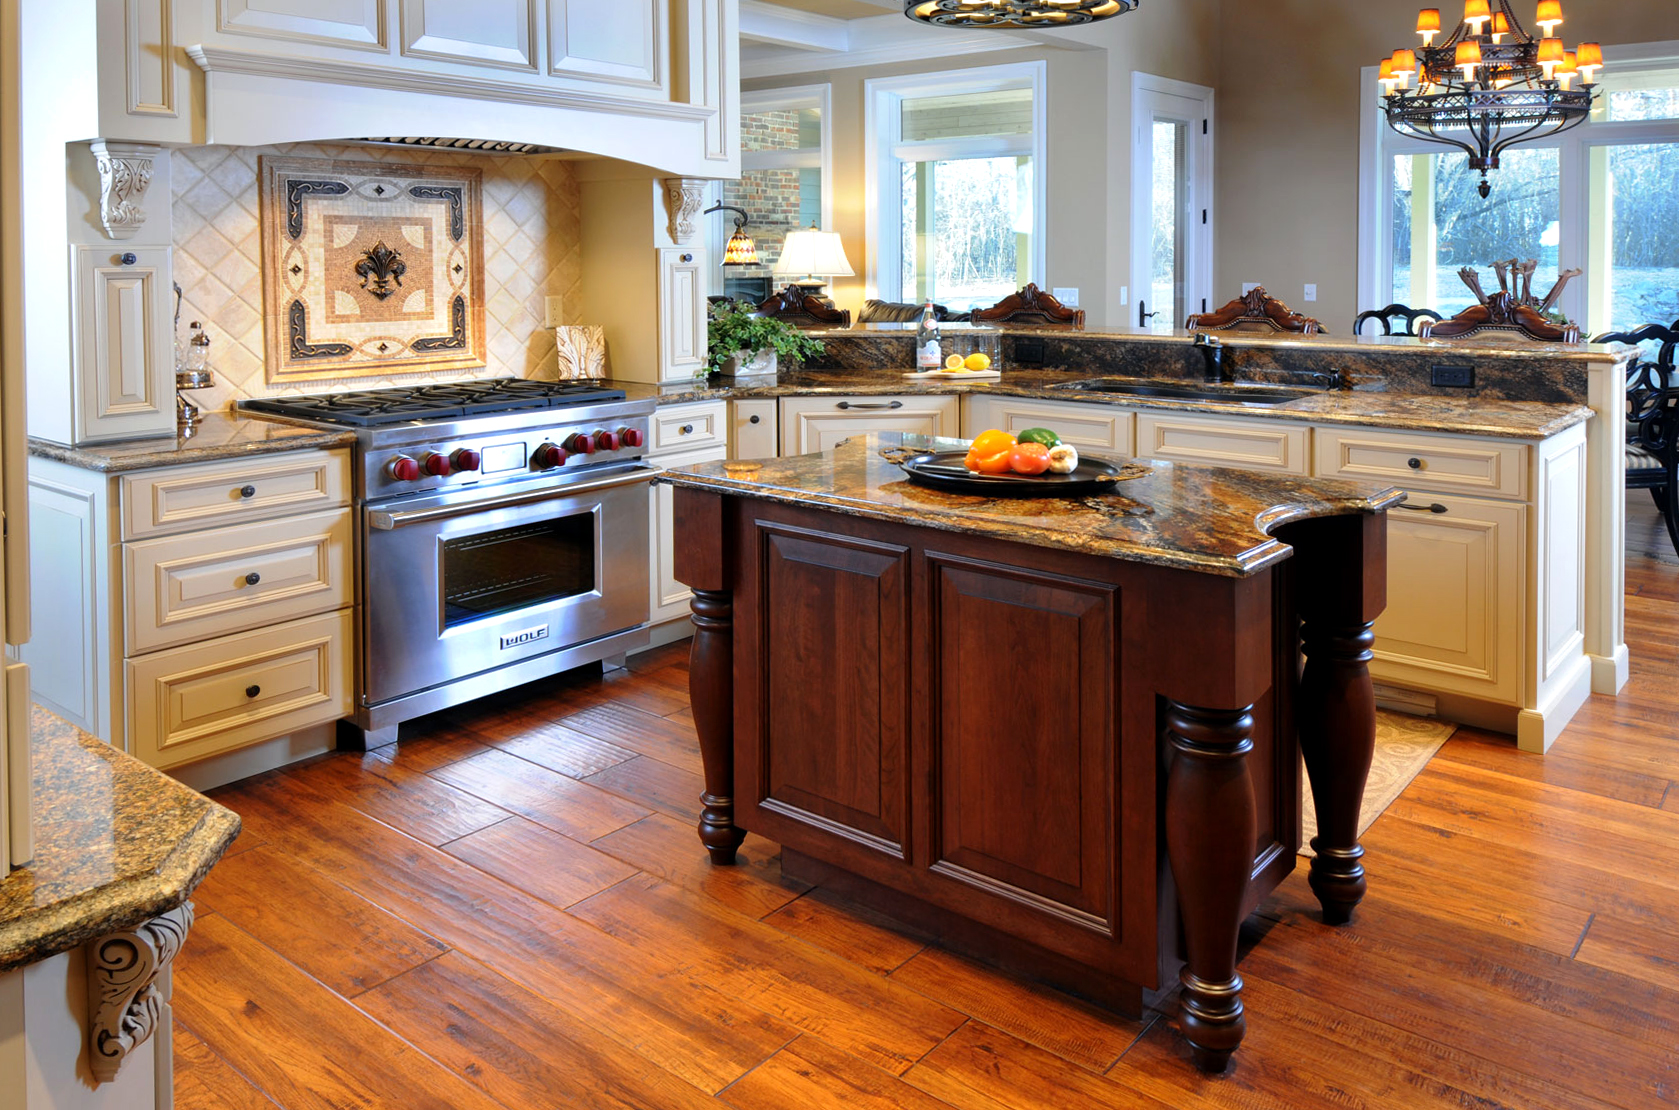 A stunning traditional styled kitchen design with a large wood hood and a table styled kitchen island.